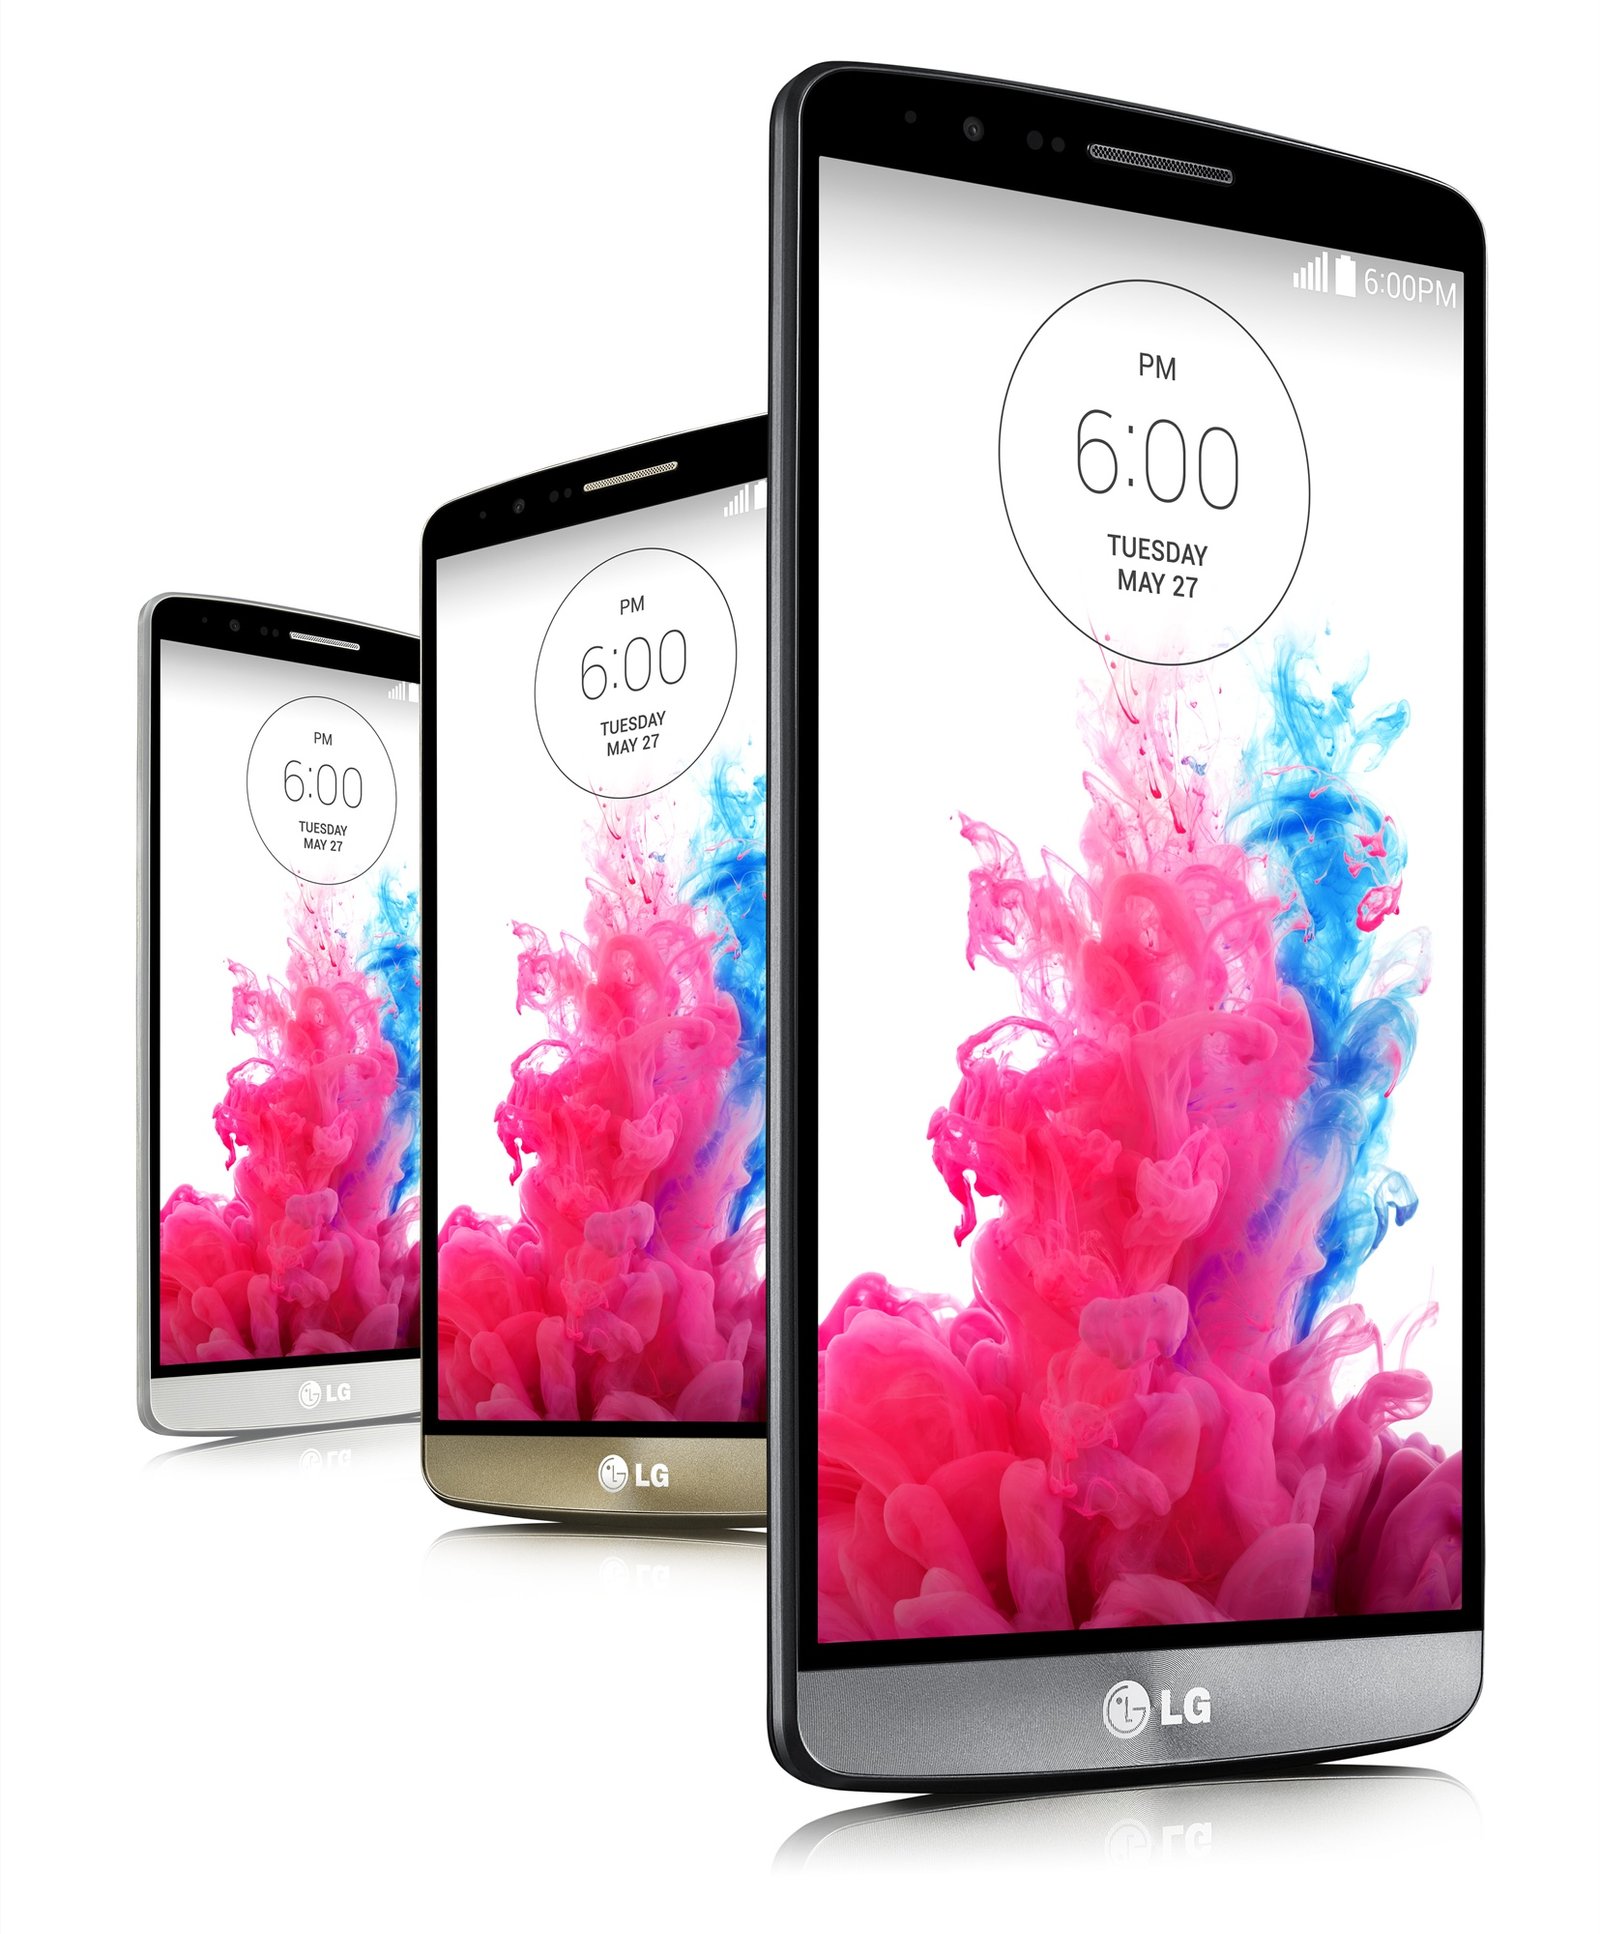 With new G3, LG aims to redefine concept of smart and simple - 1655 x 2000